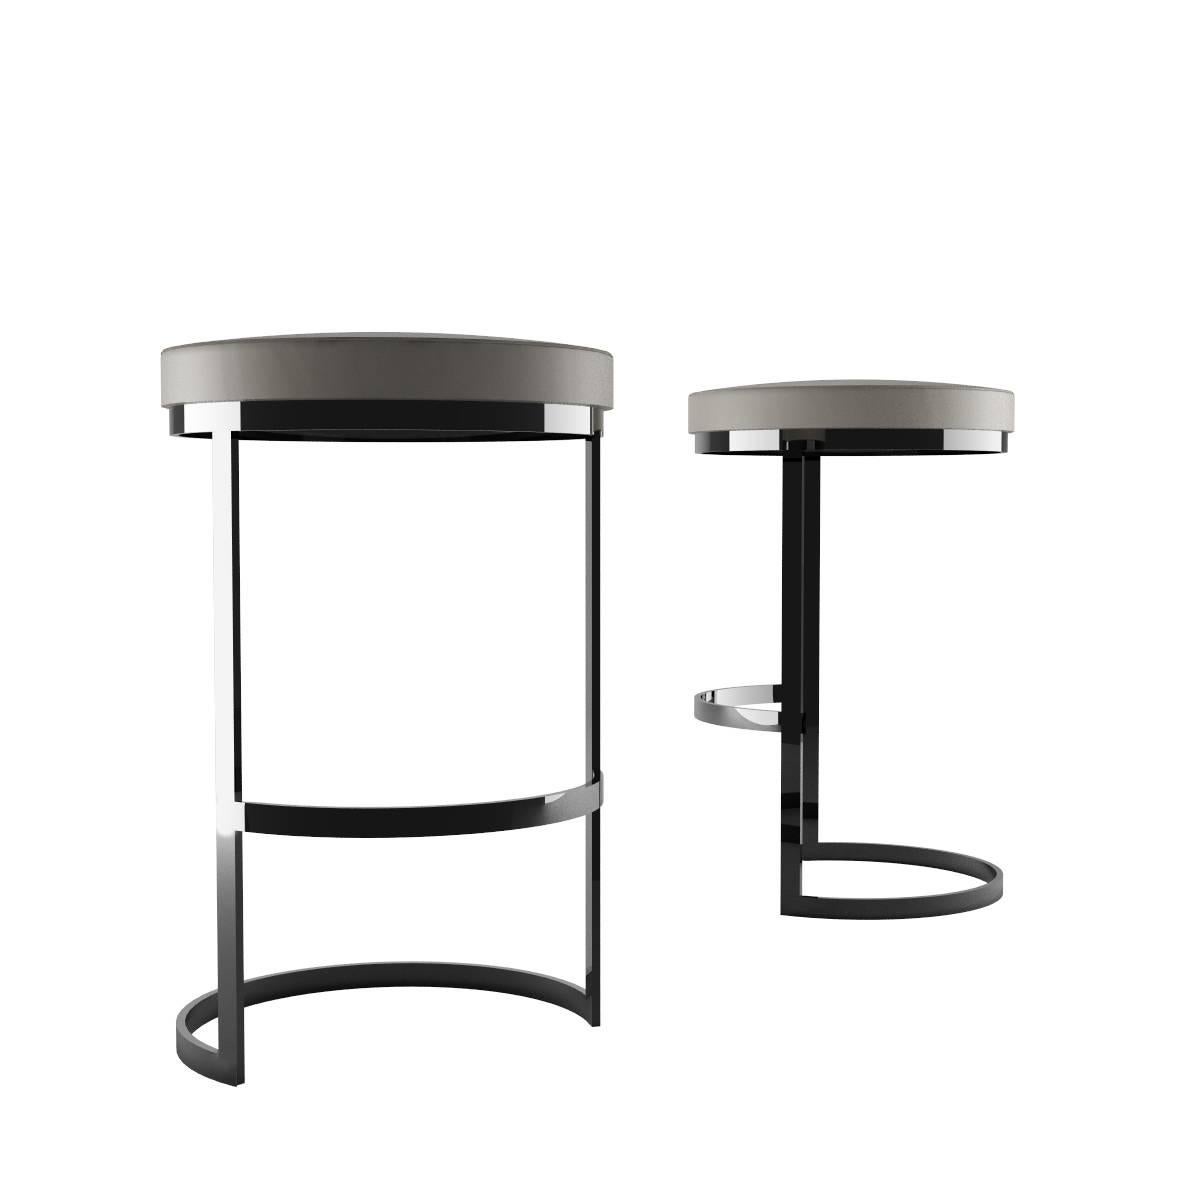 This beautiful counter stool also is available in bar stool height. 

Measures: H 25.2 or 31.1” / 64 or 79 cm

Inspired by Milano, Italy’s cultural metropolis of design and fashion, Zalaba’s exclusive Ola collection reminds of the 1970s clean